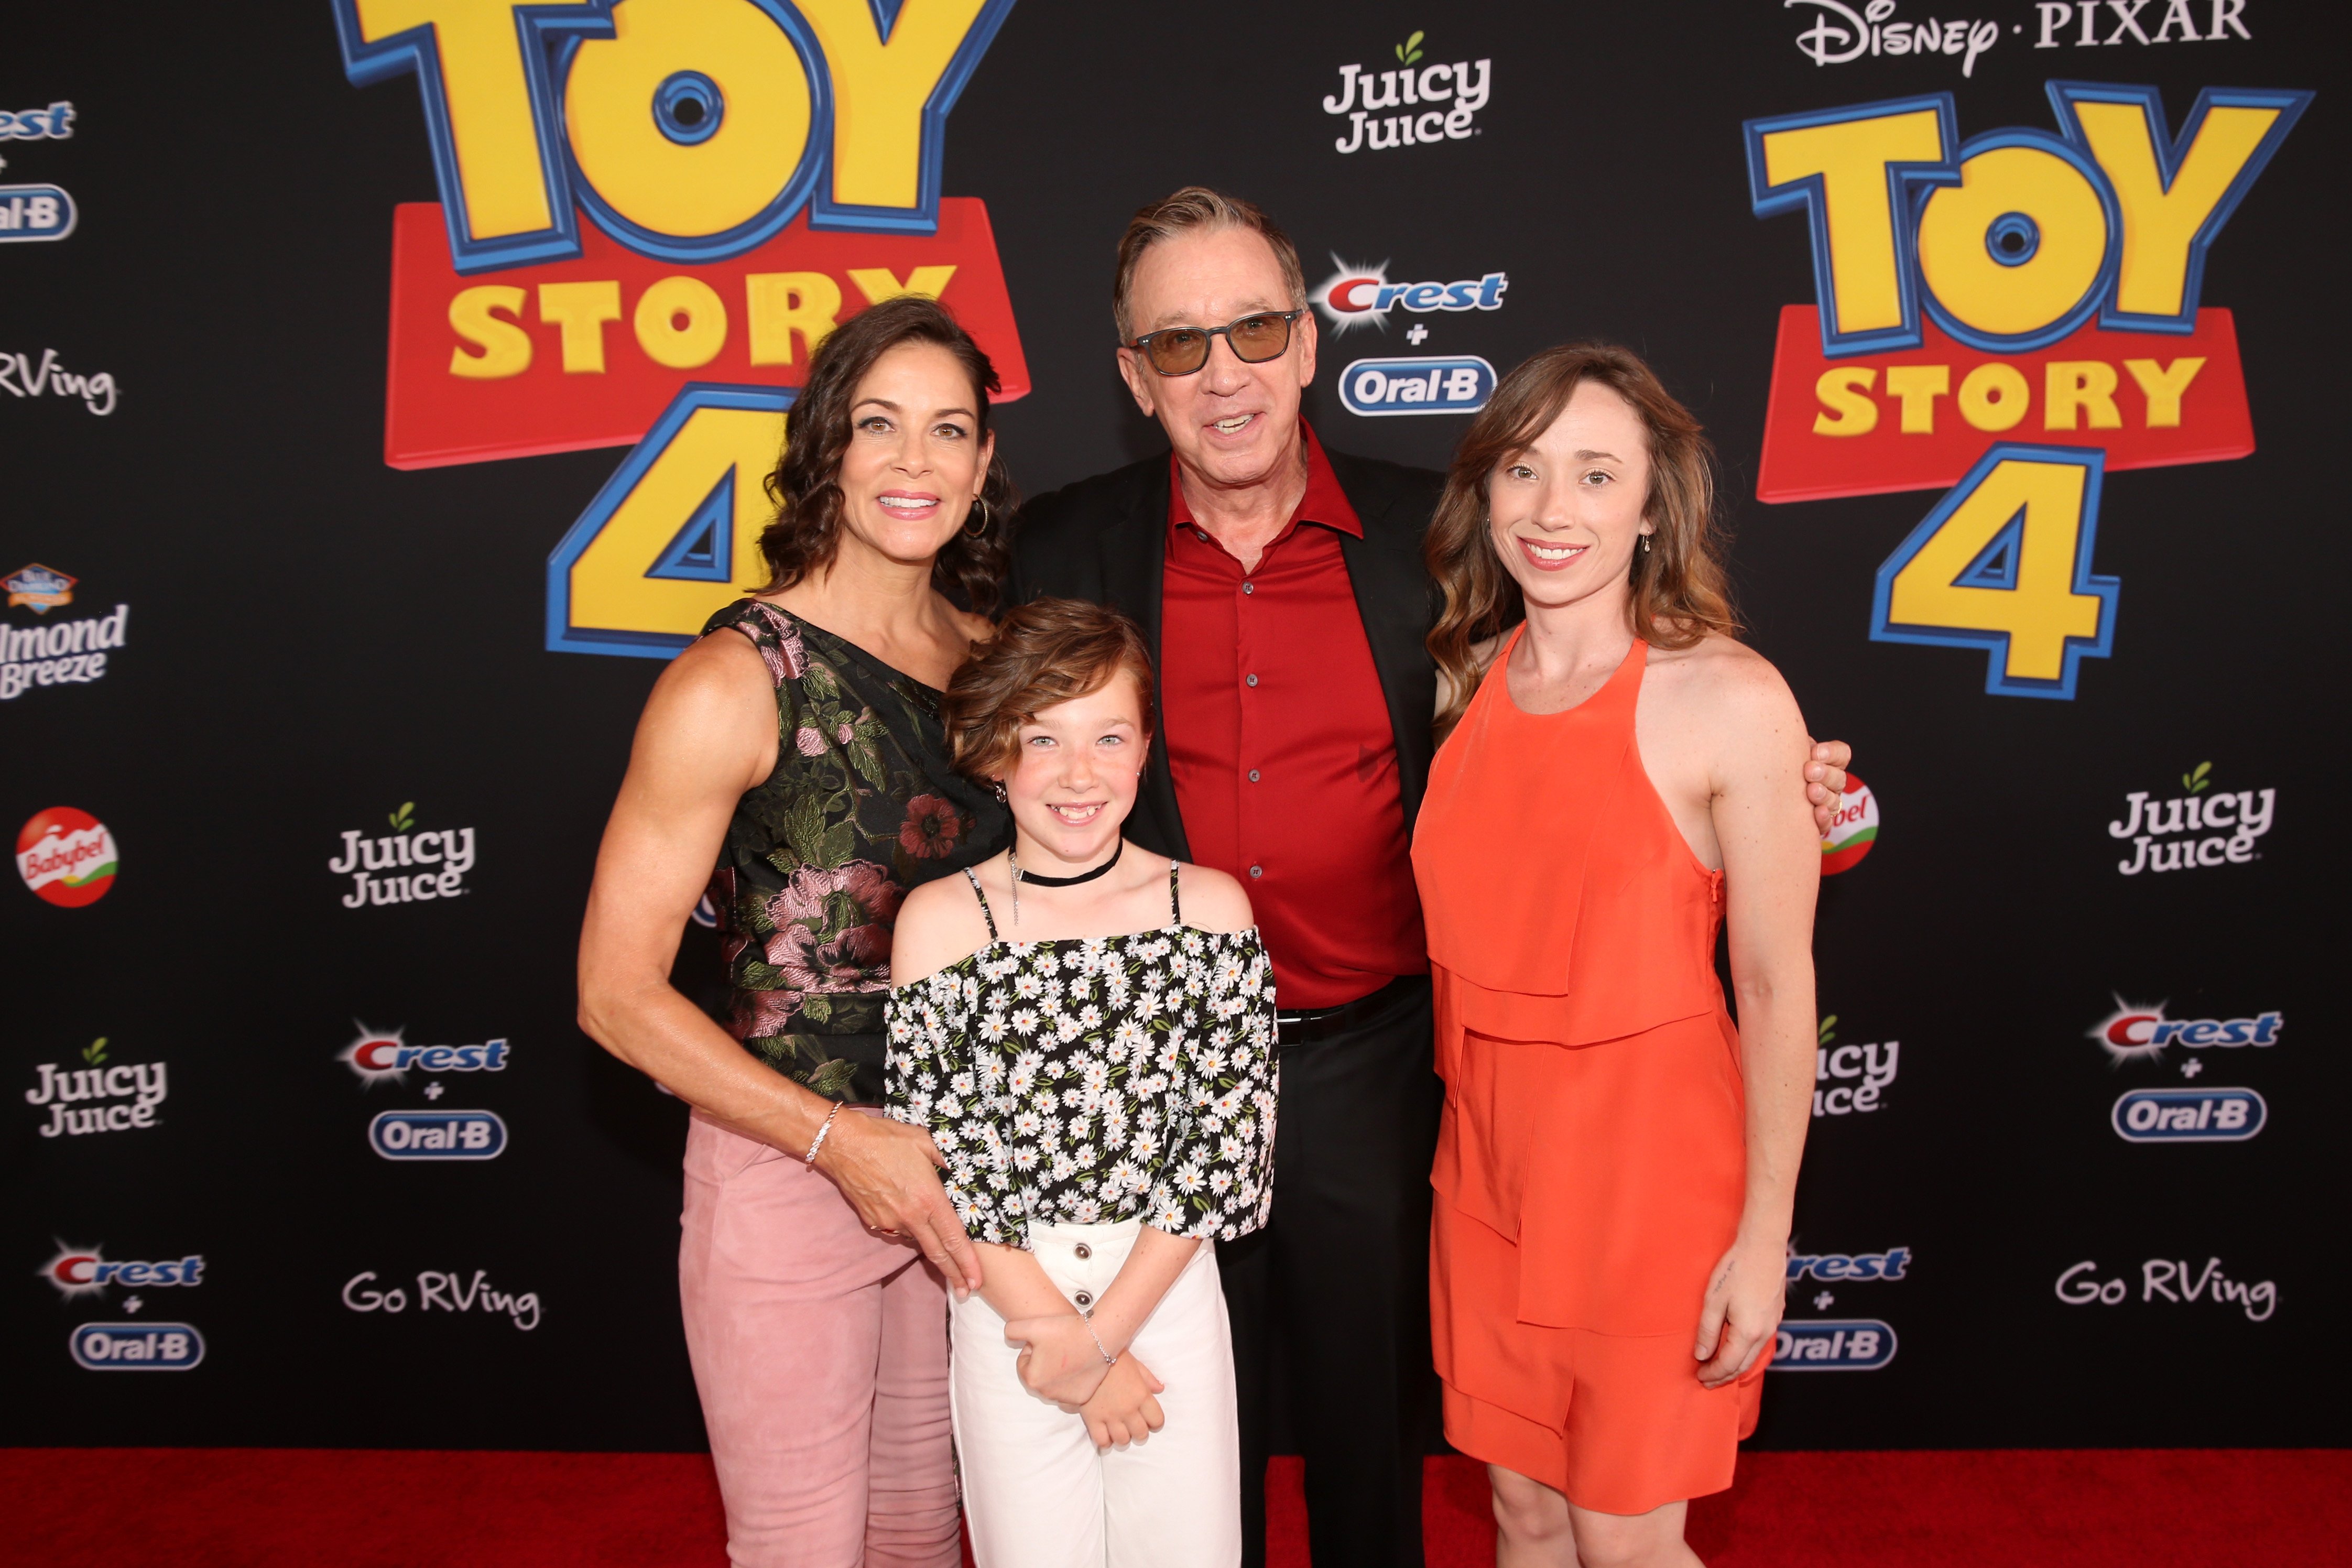 Tim Allen, his wife Jane Hajduk, and his daughters Katherine and Elizabeth attend the premiere of "Toy Story 4" in Los Angeles in June 2019 | Photo: Getty Images